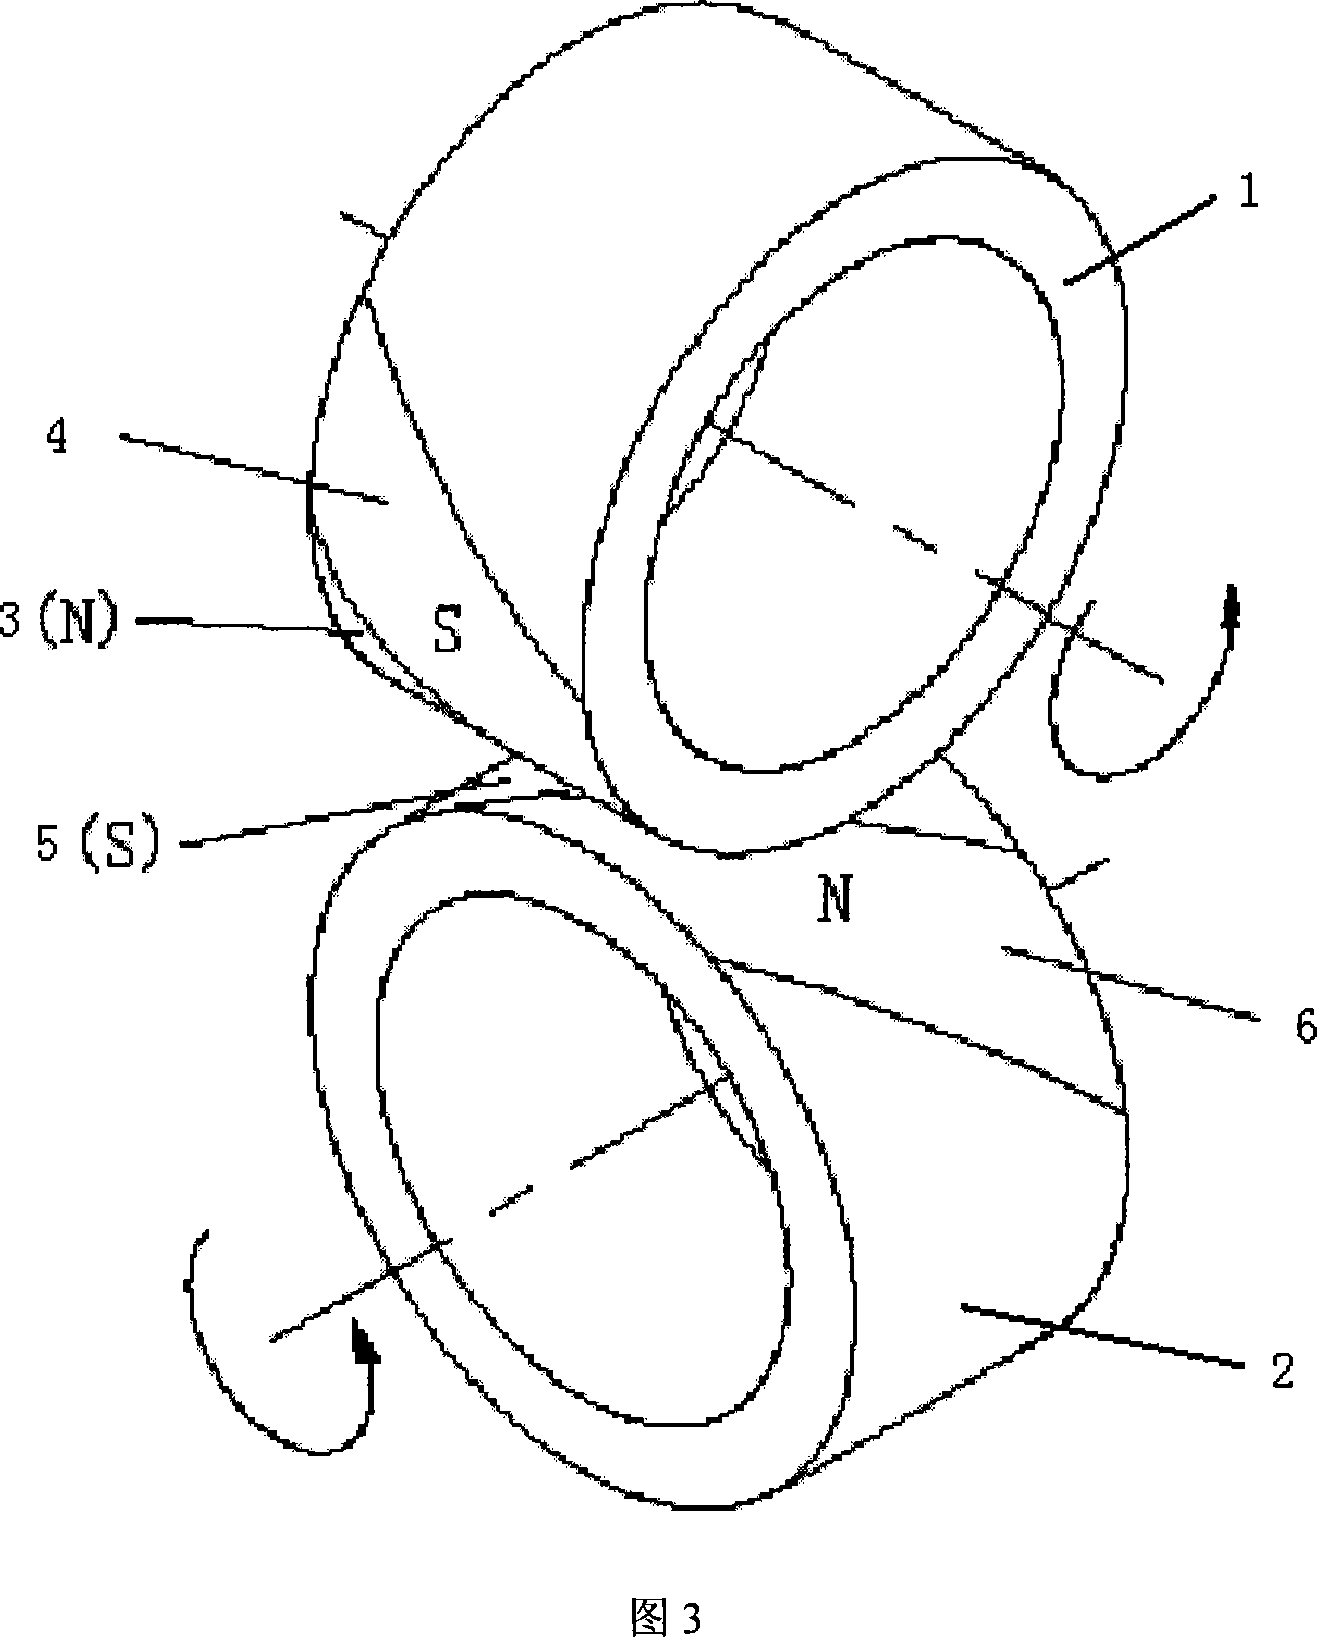 Non-contact space cross transmission magnetic gear and its manufacturing method and applicaiton